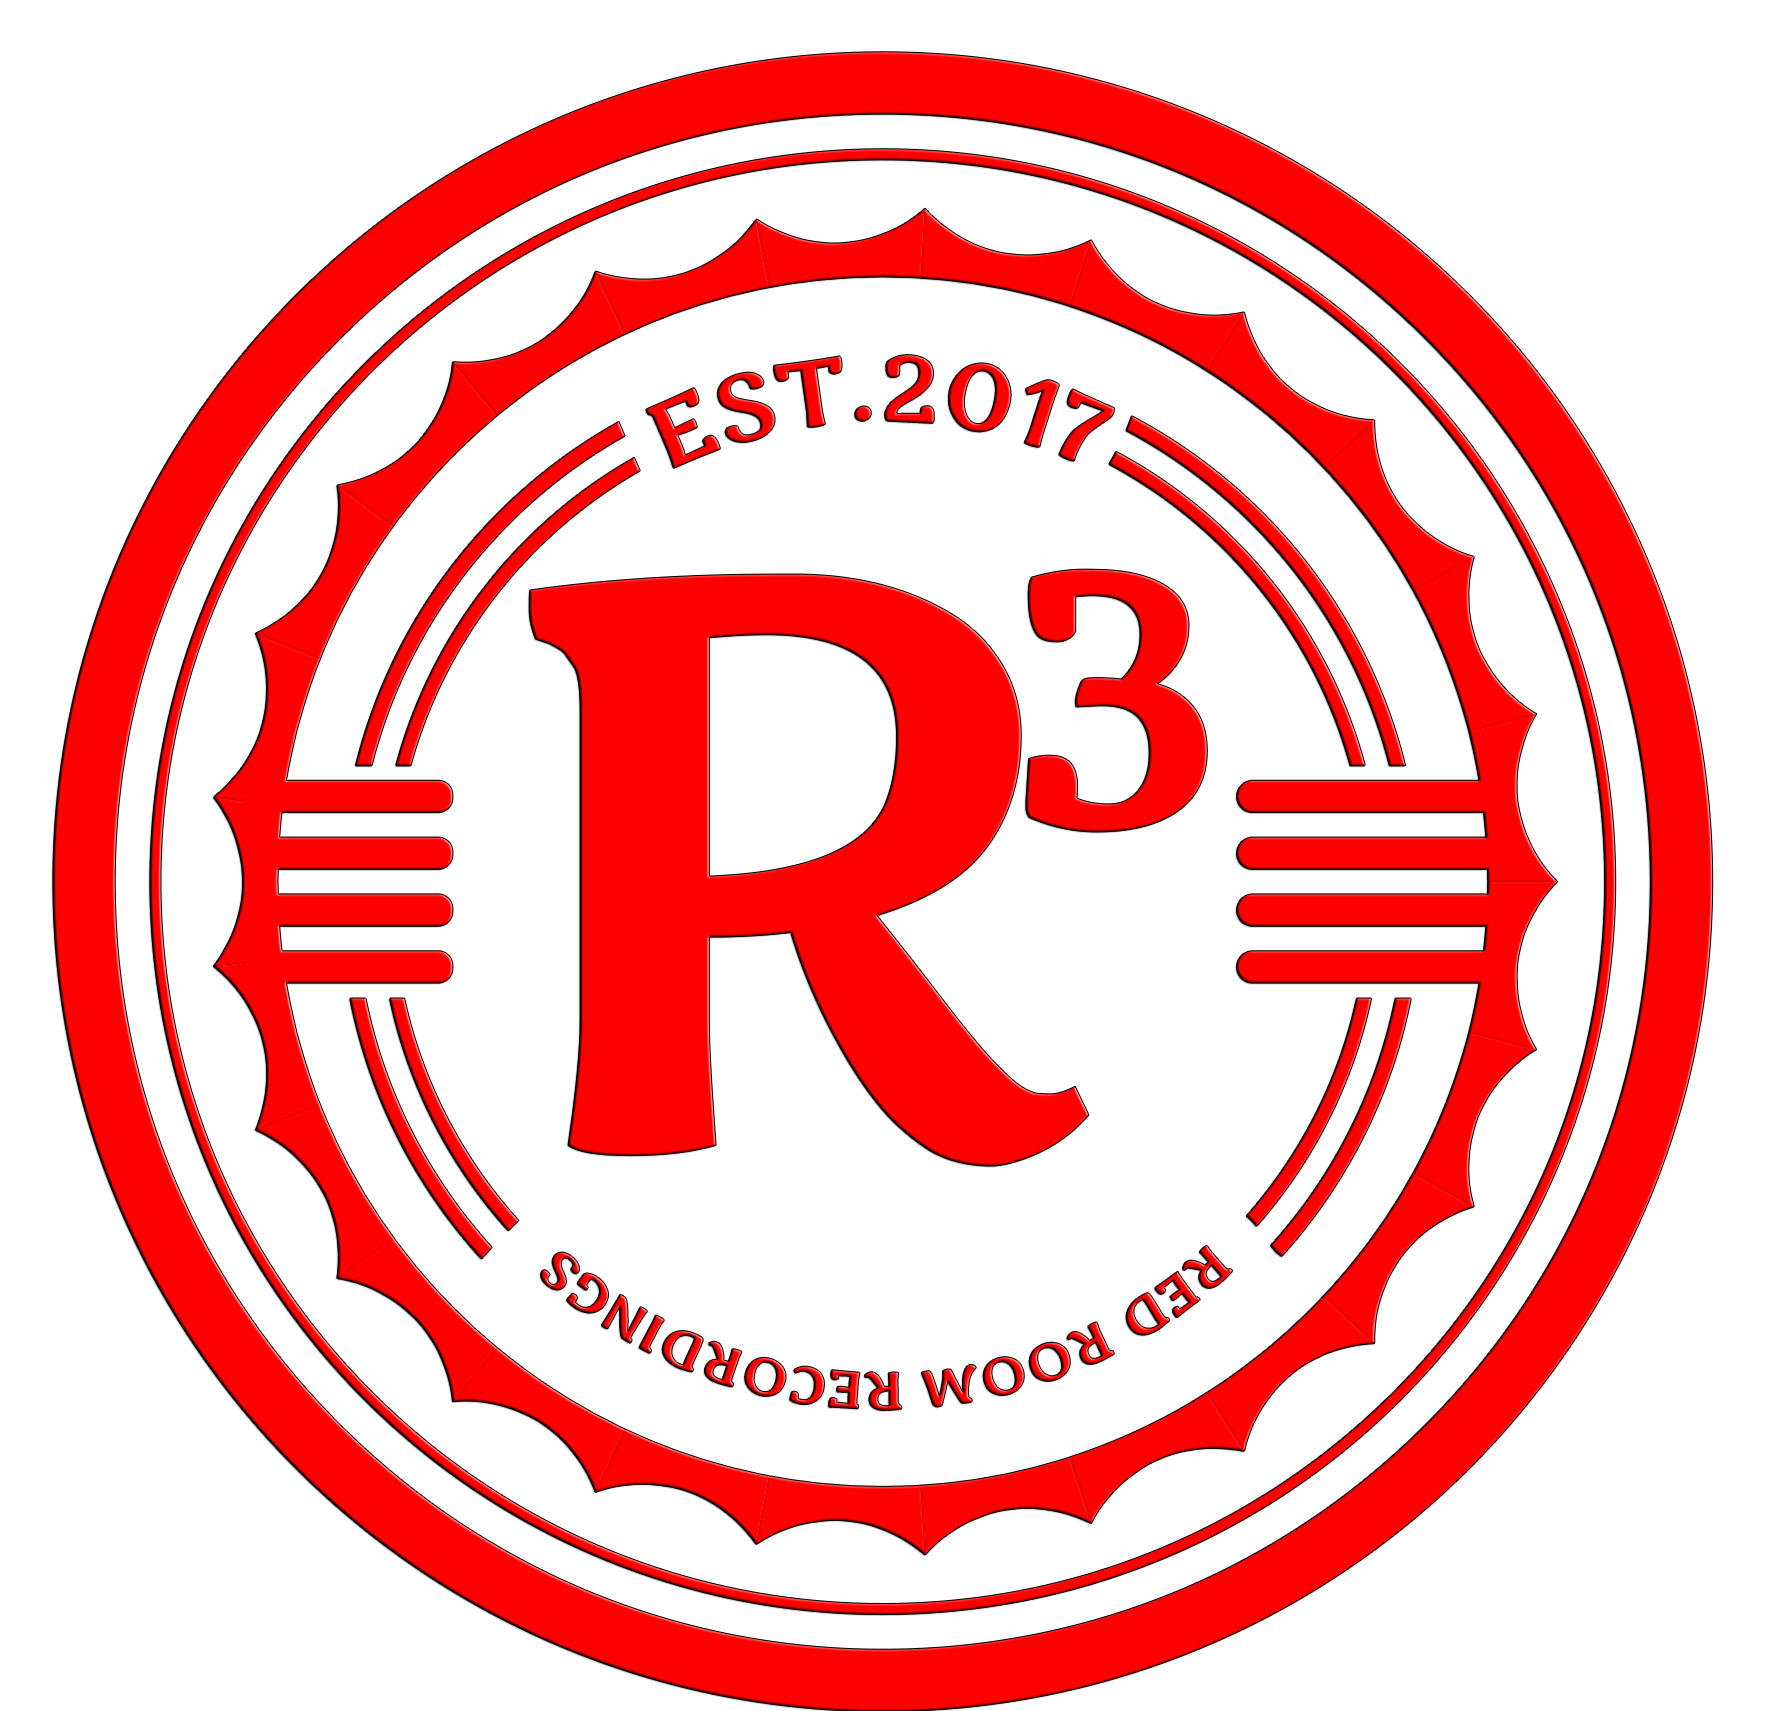 R3-Red-Logo-PNG